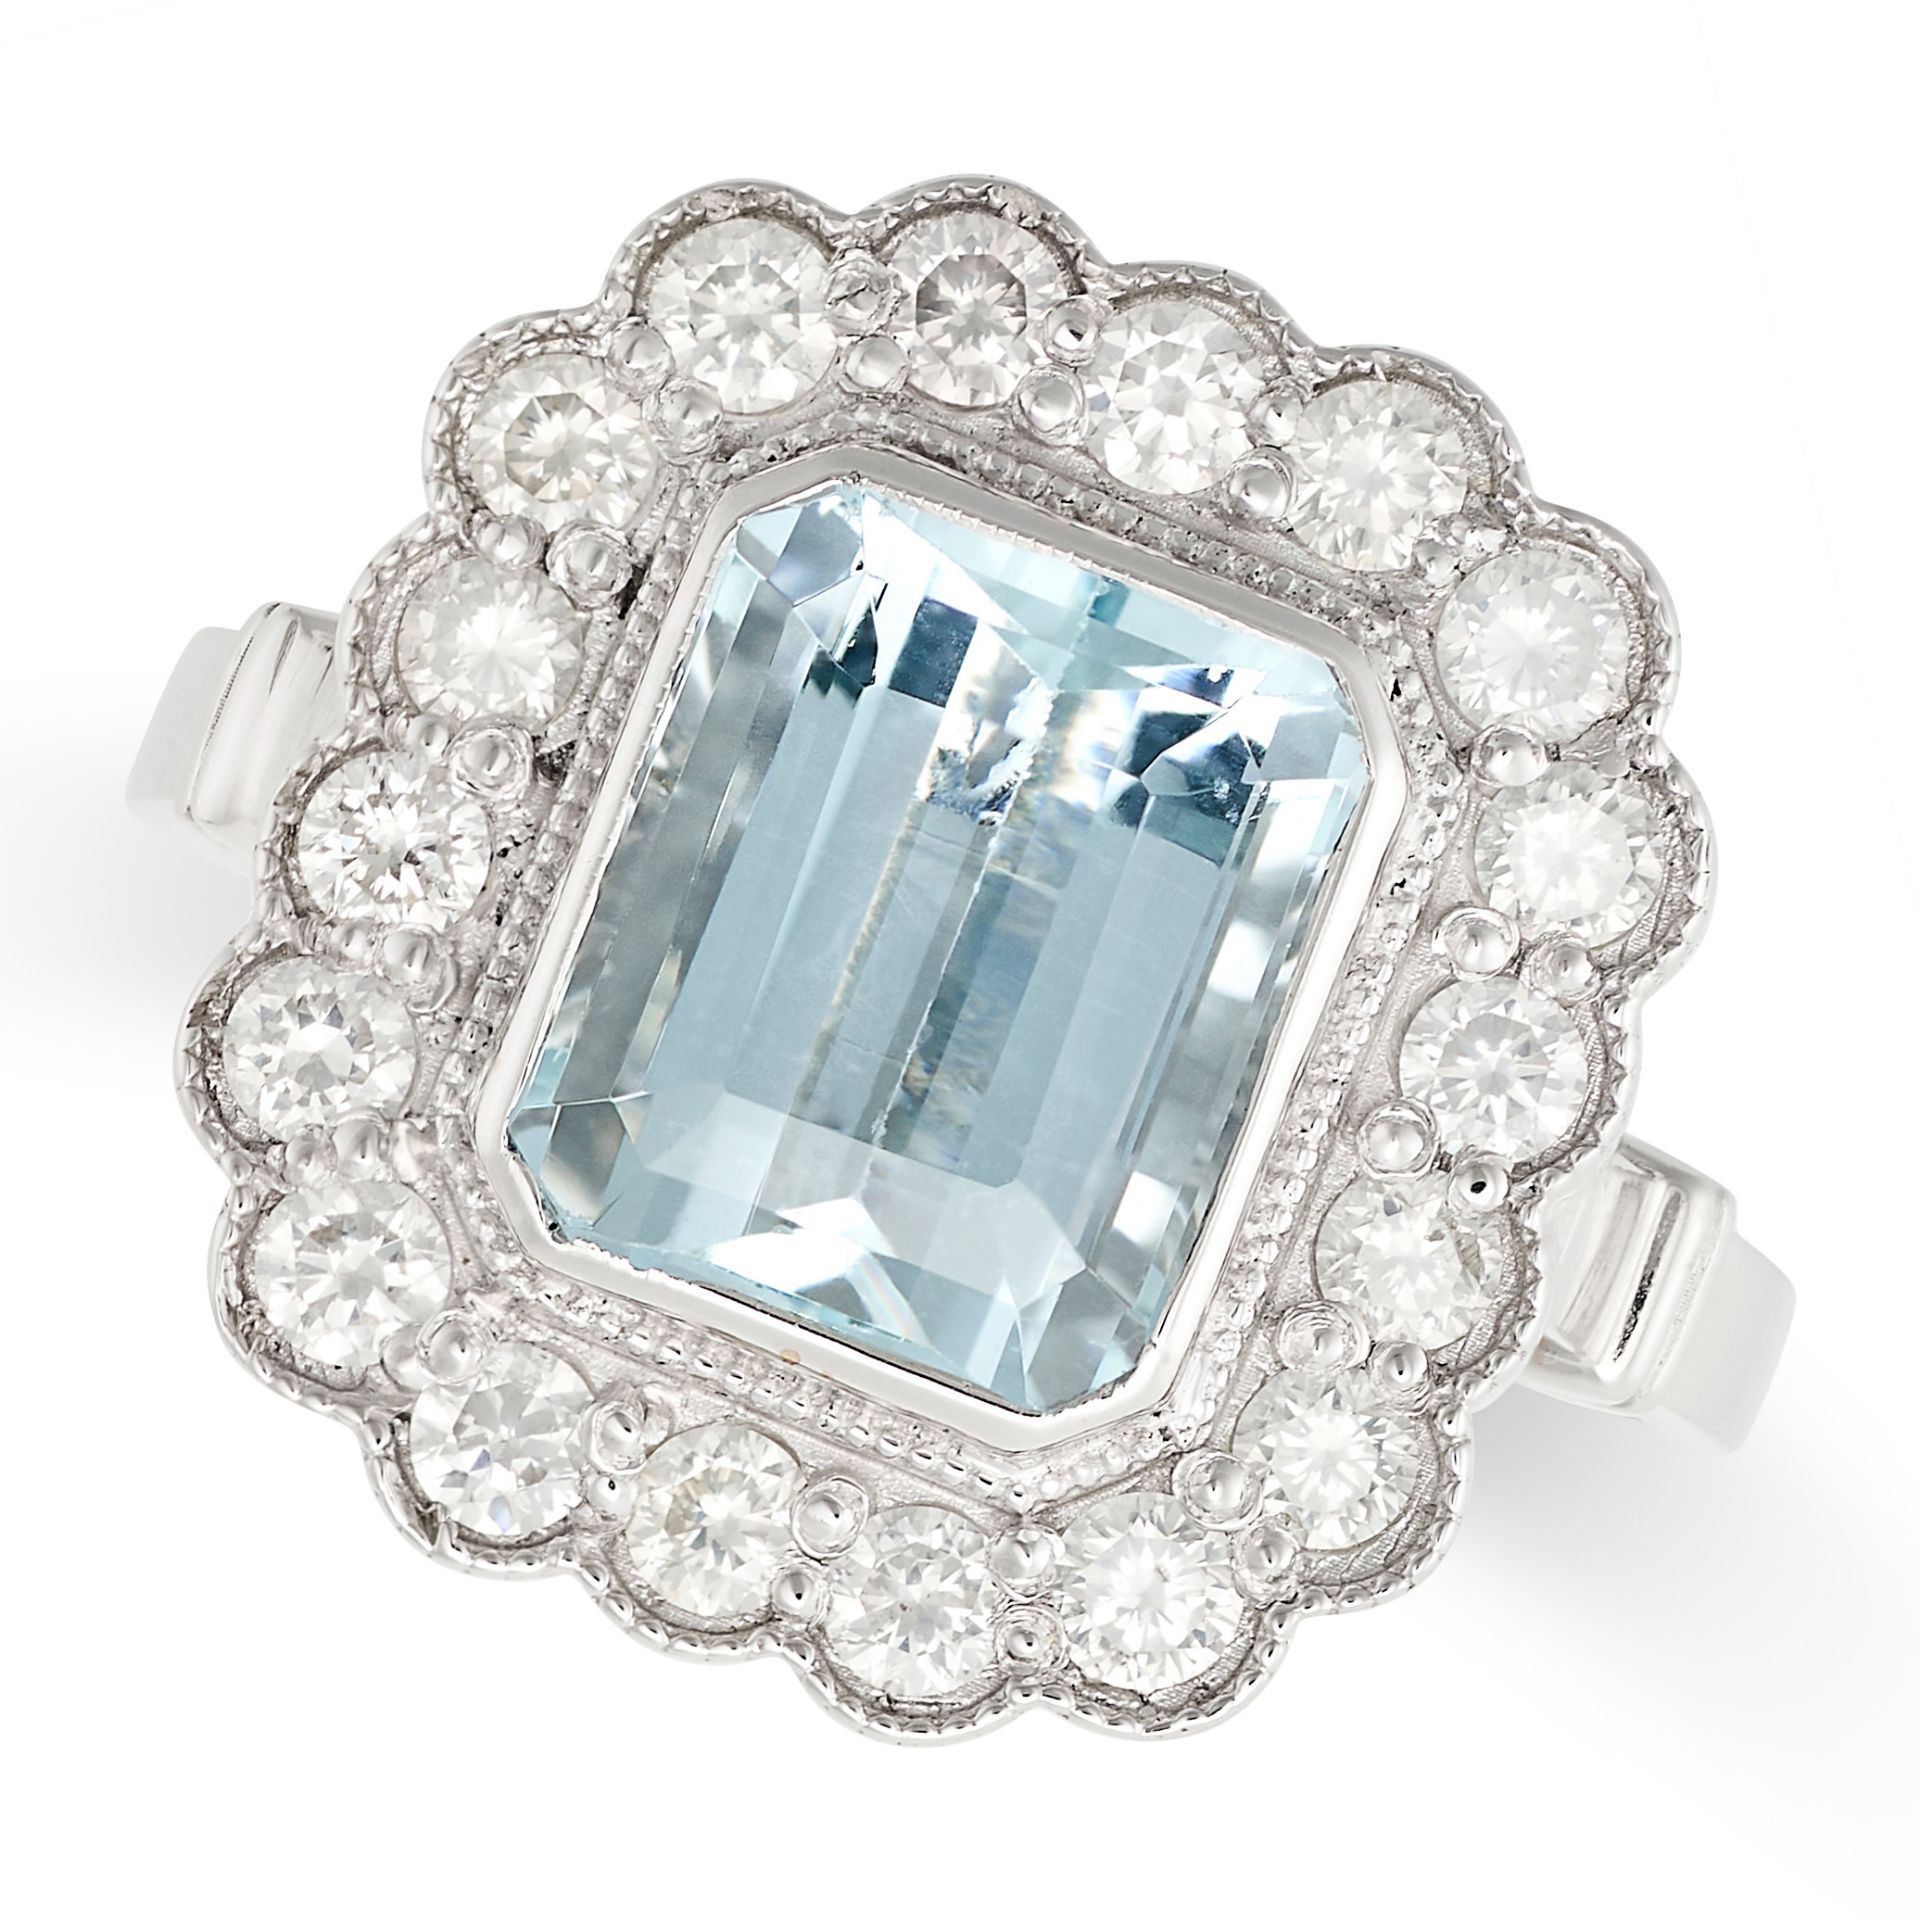 AN AQUAMARINE AND DIAMOND CLUSTER RING set with an emerald cut aquamarine of 3.30 carats in a